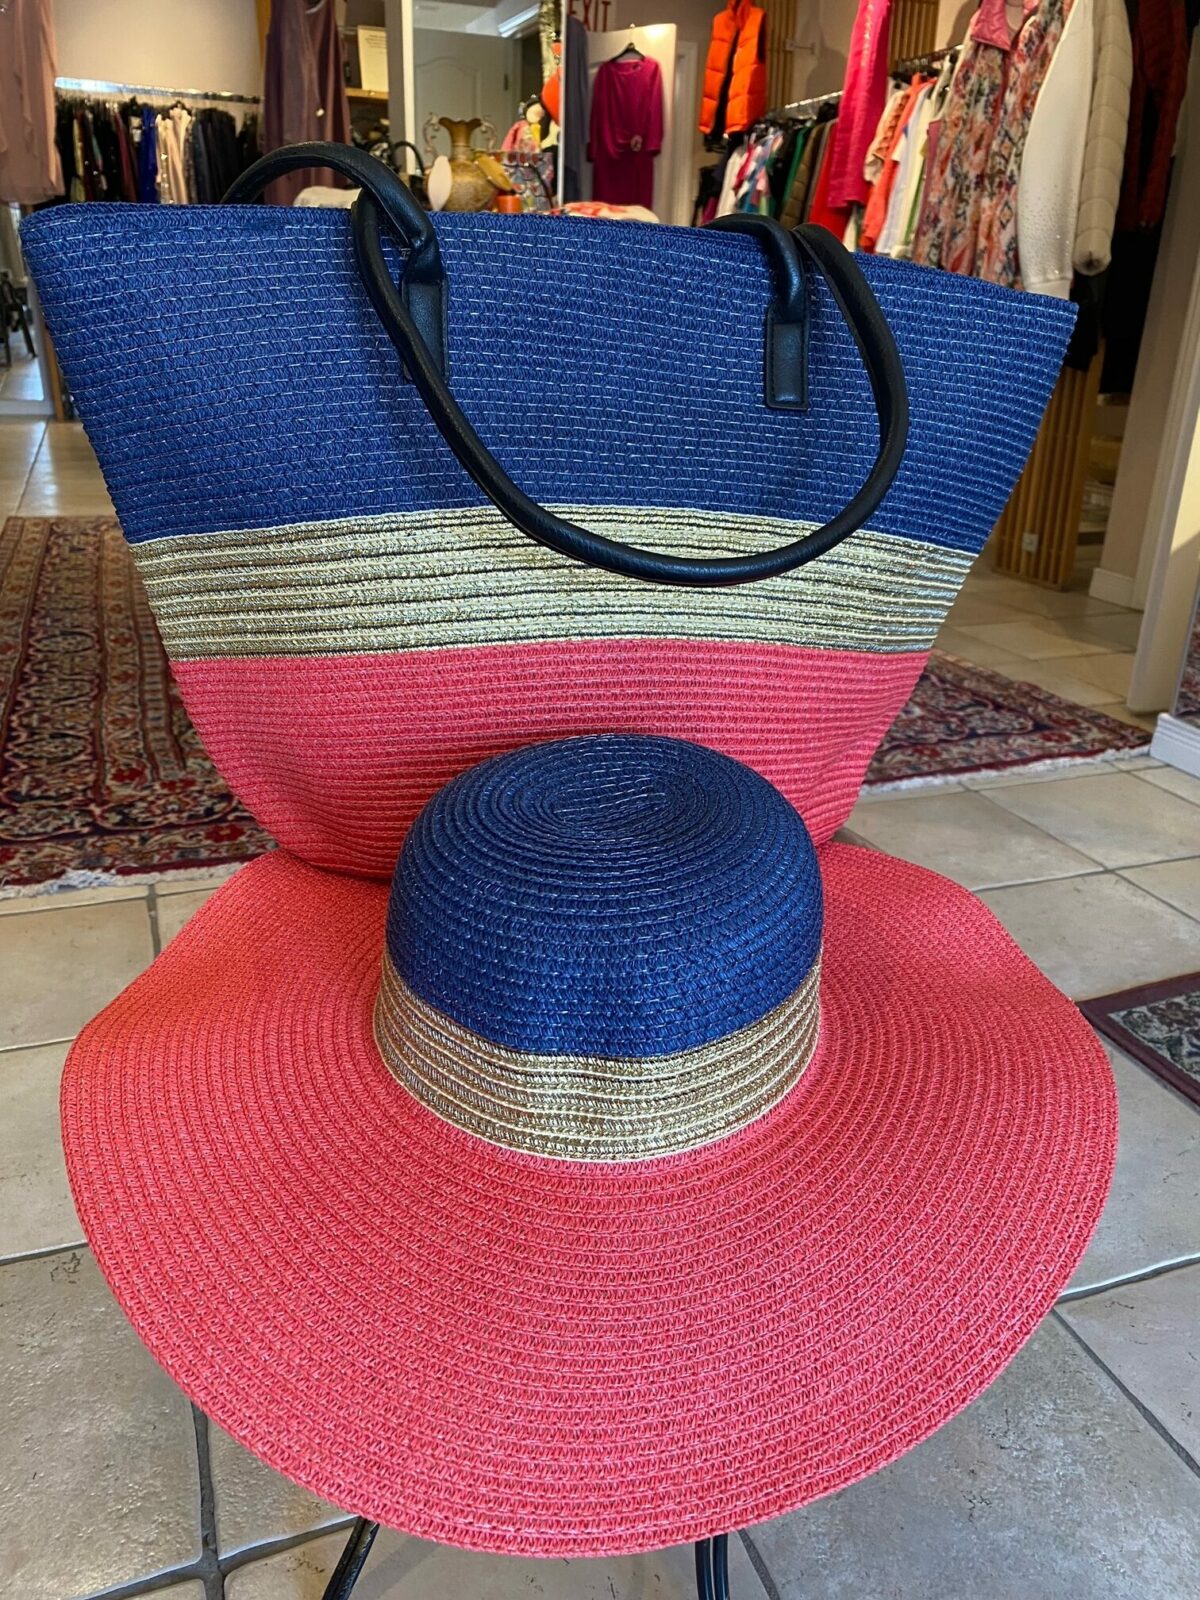 Pink & Blue sunhat and tote bag.